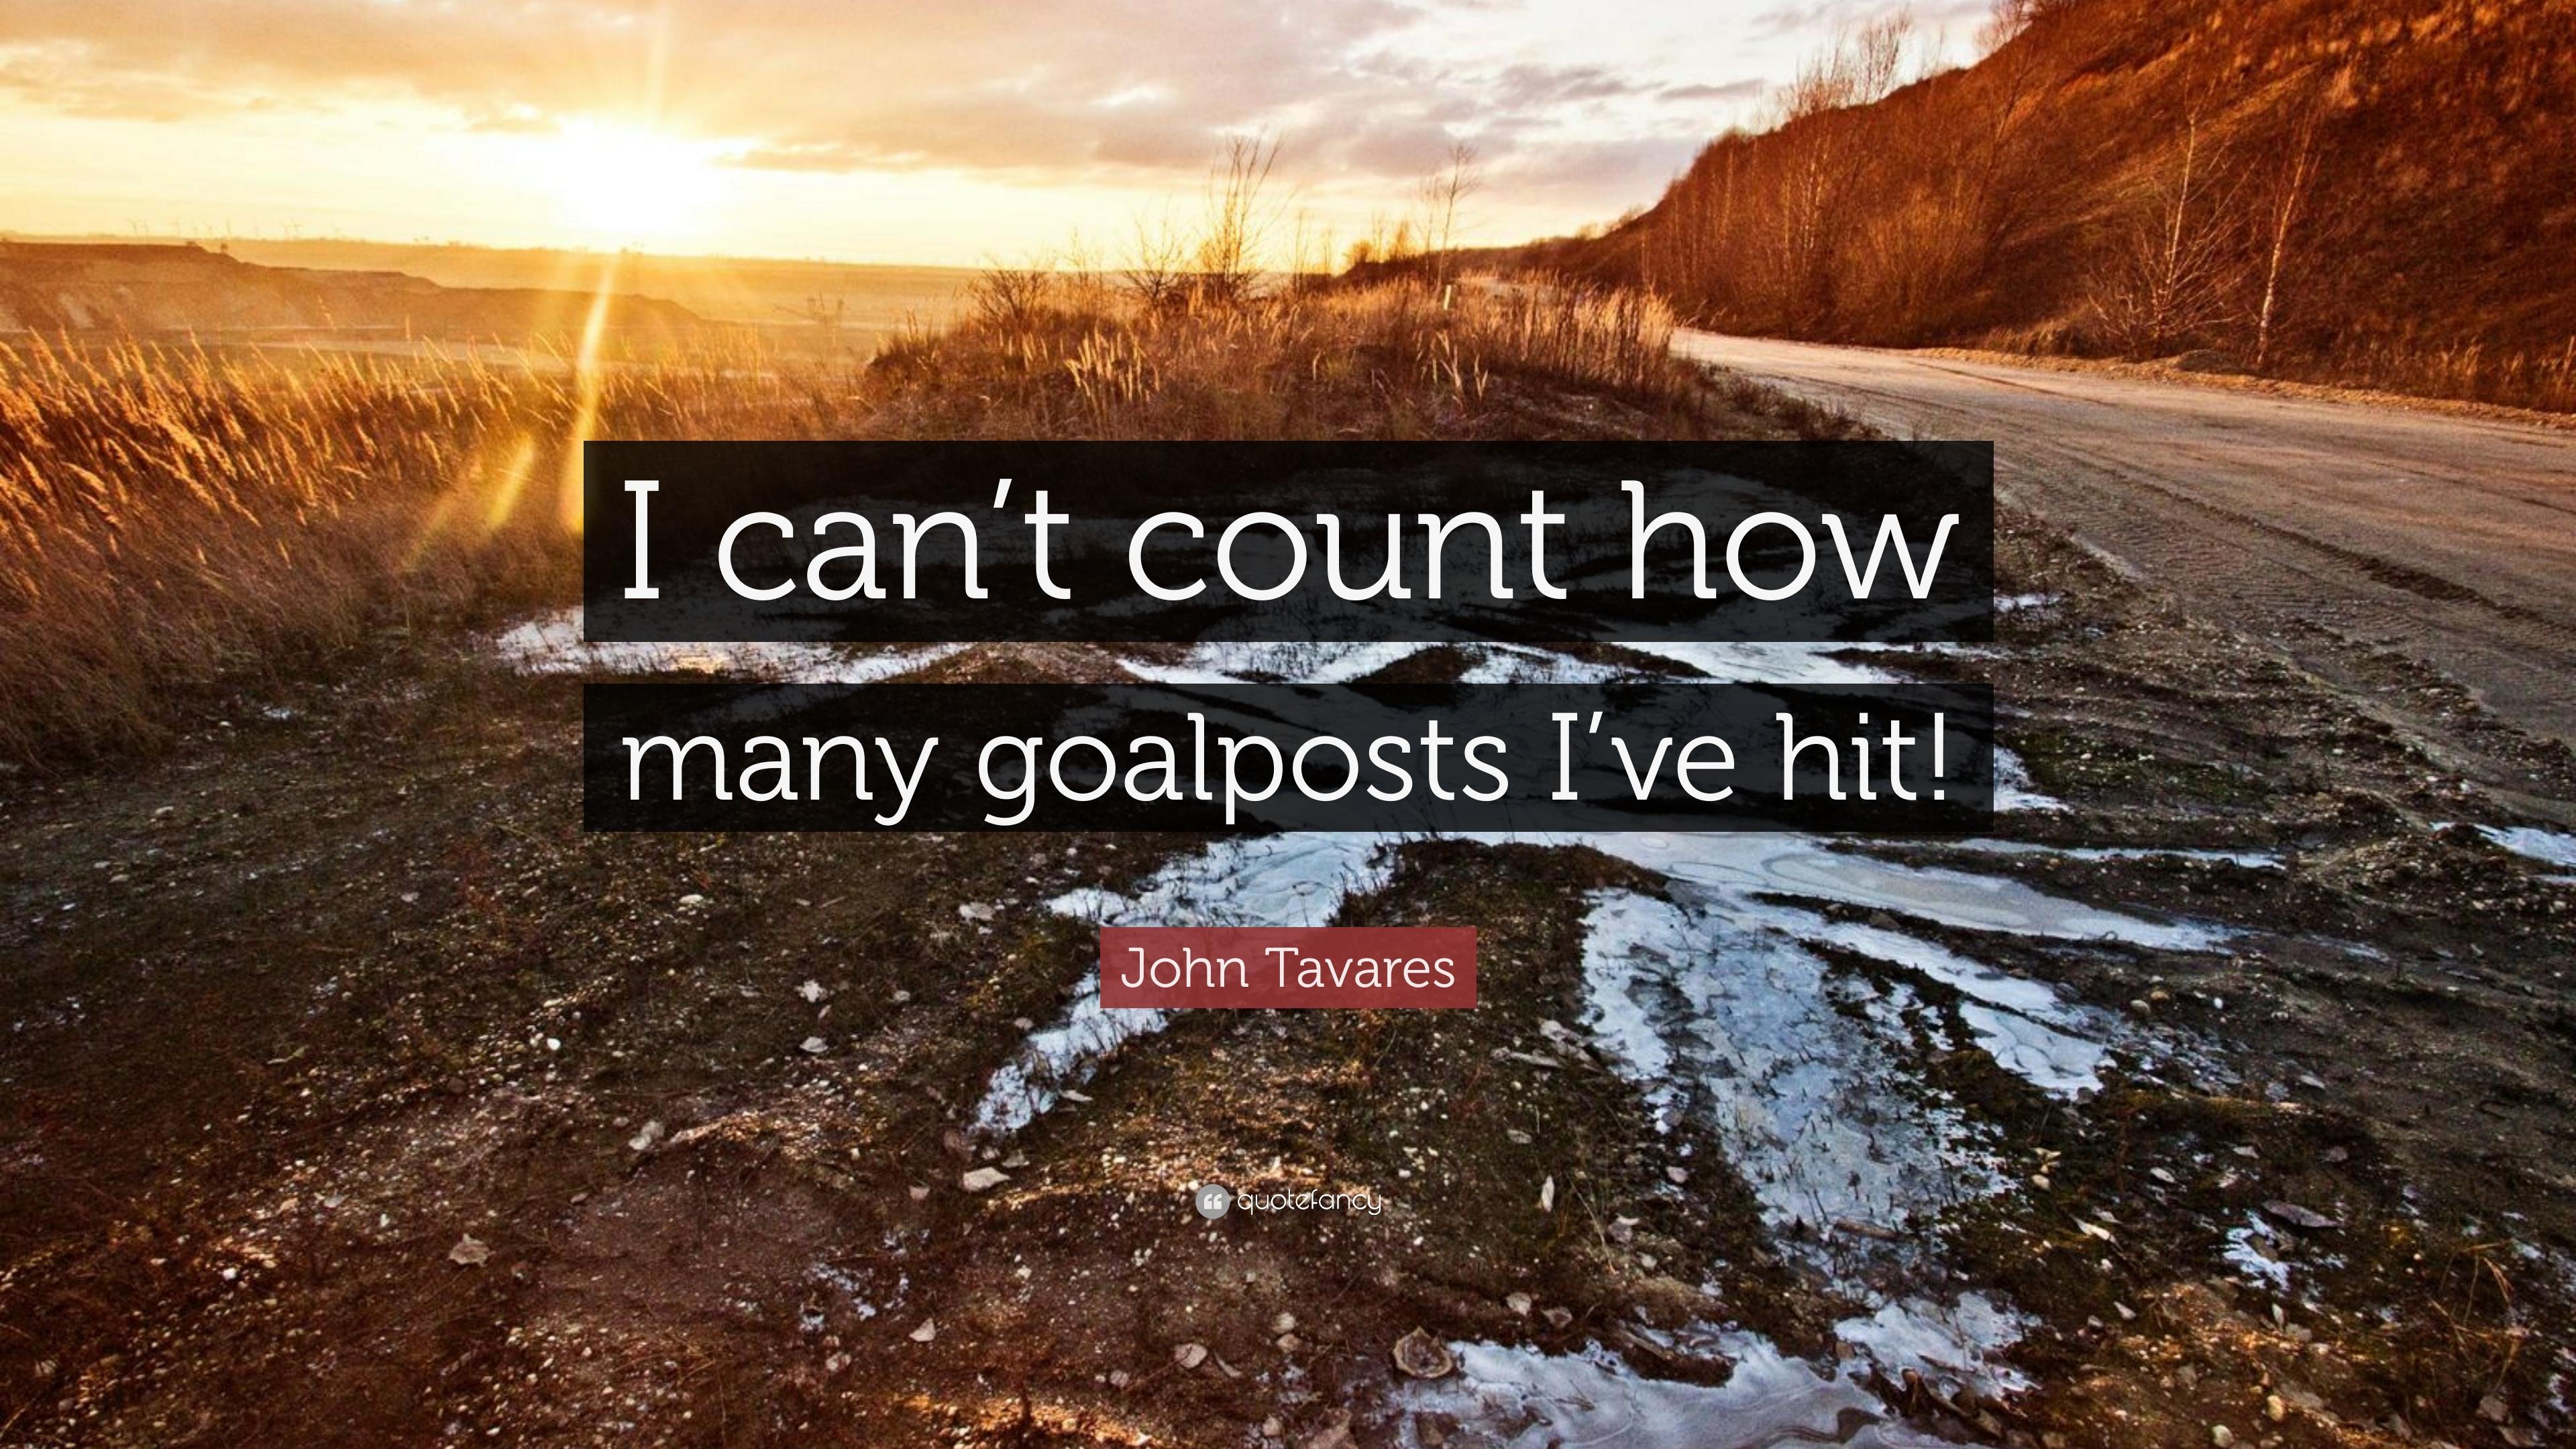 John Tavares Quote: “I can't count how many goalposts I've hit!” 7